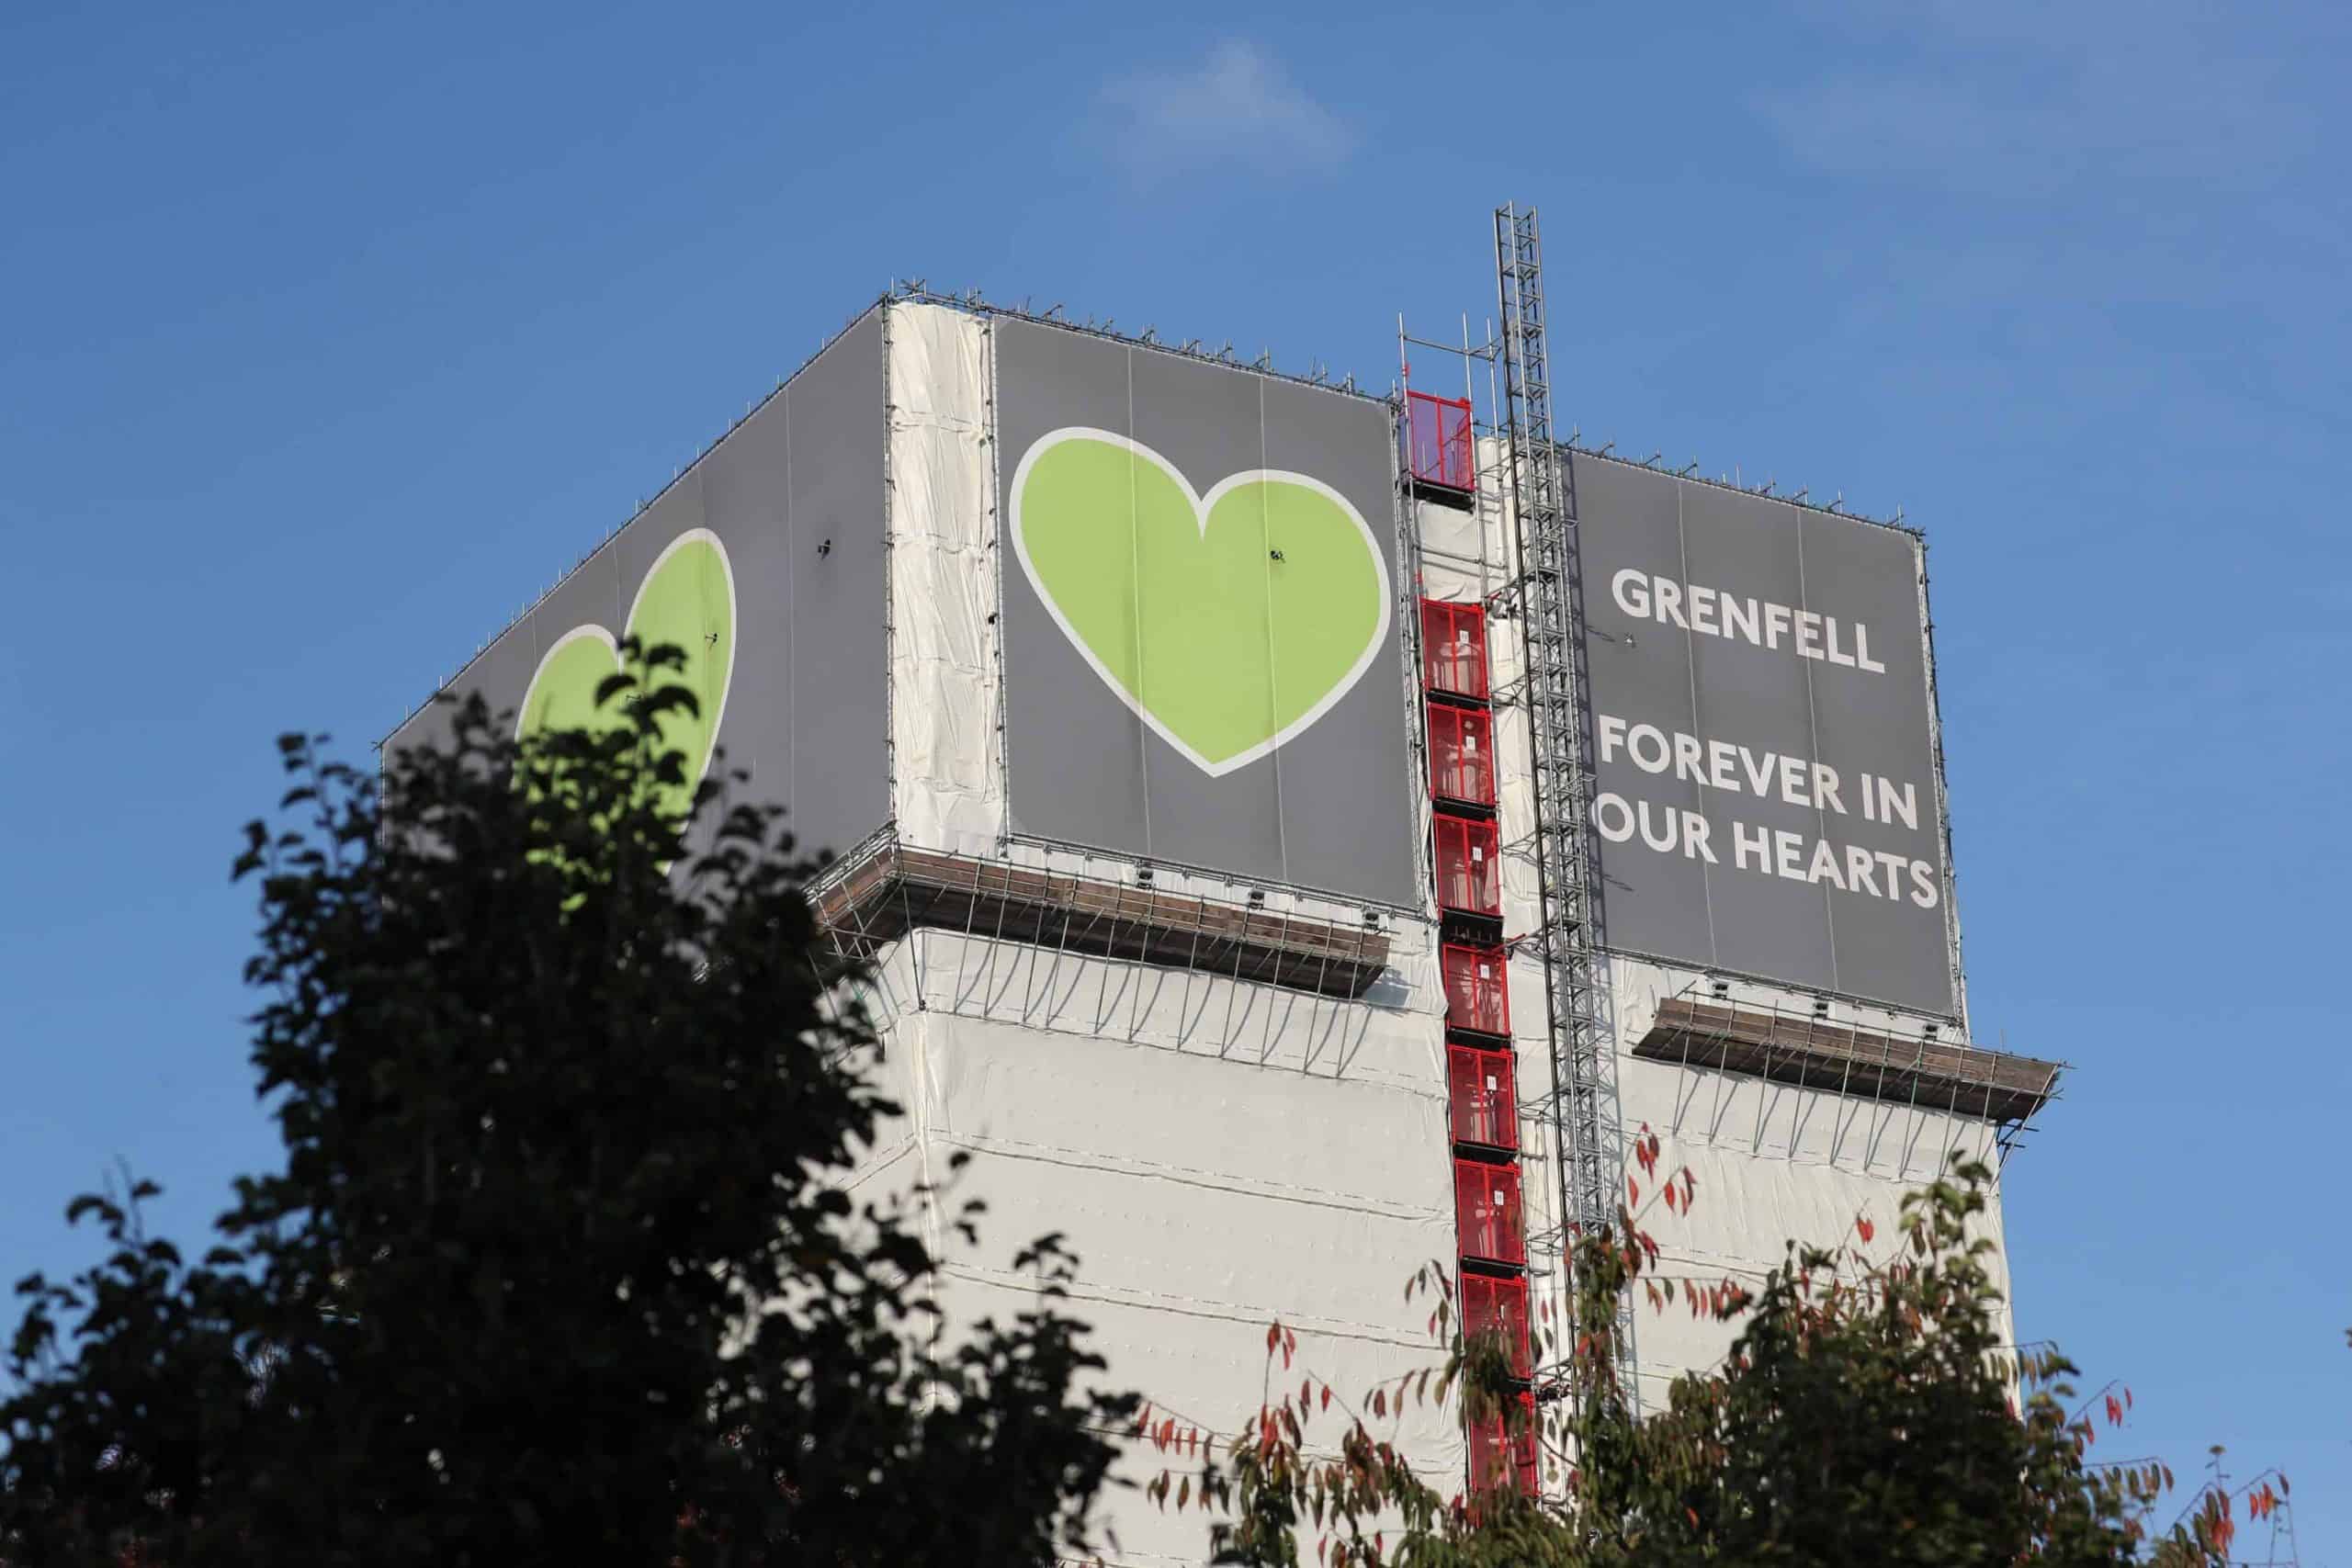 Grenfell cladding firm planned to use tower as flagship product, inquiry told